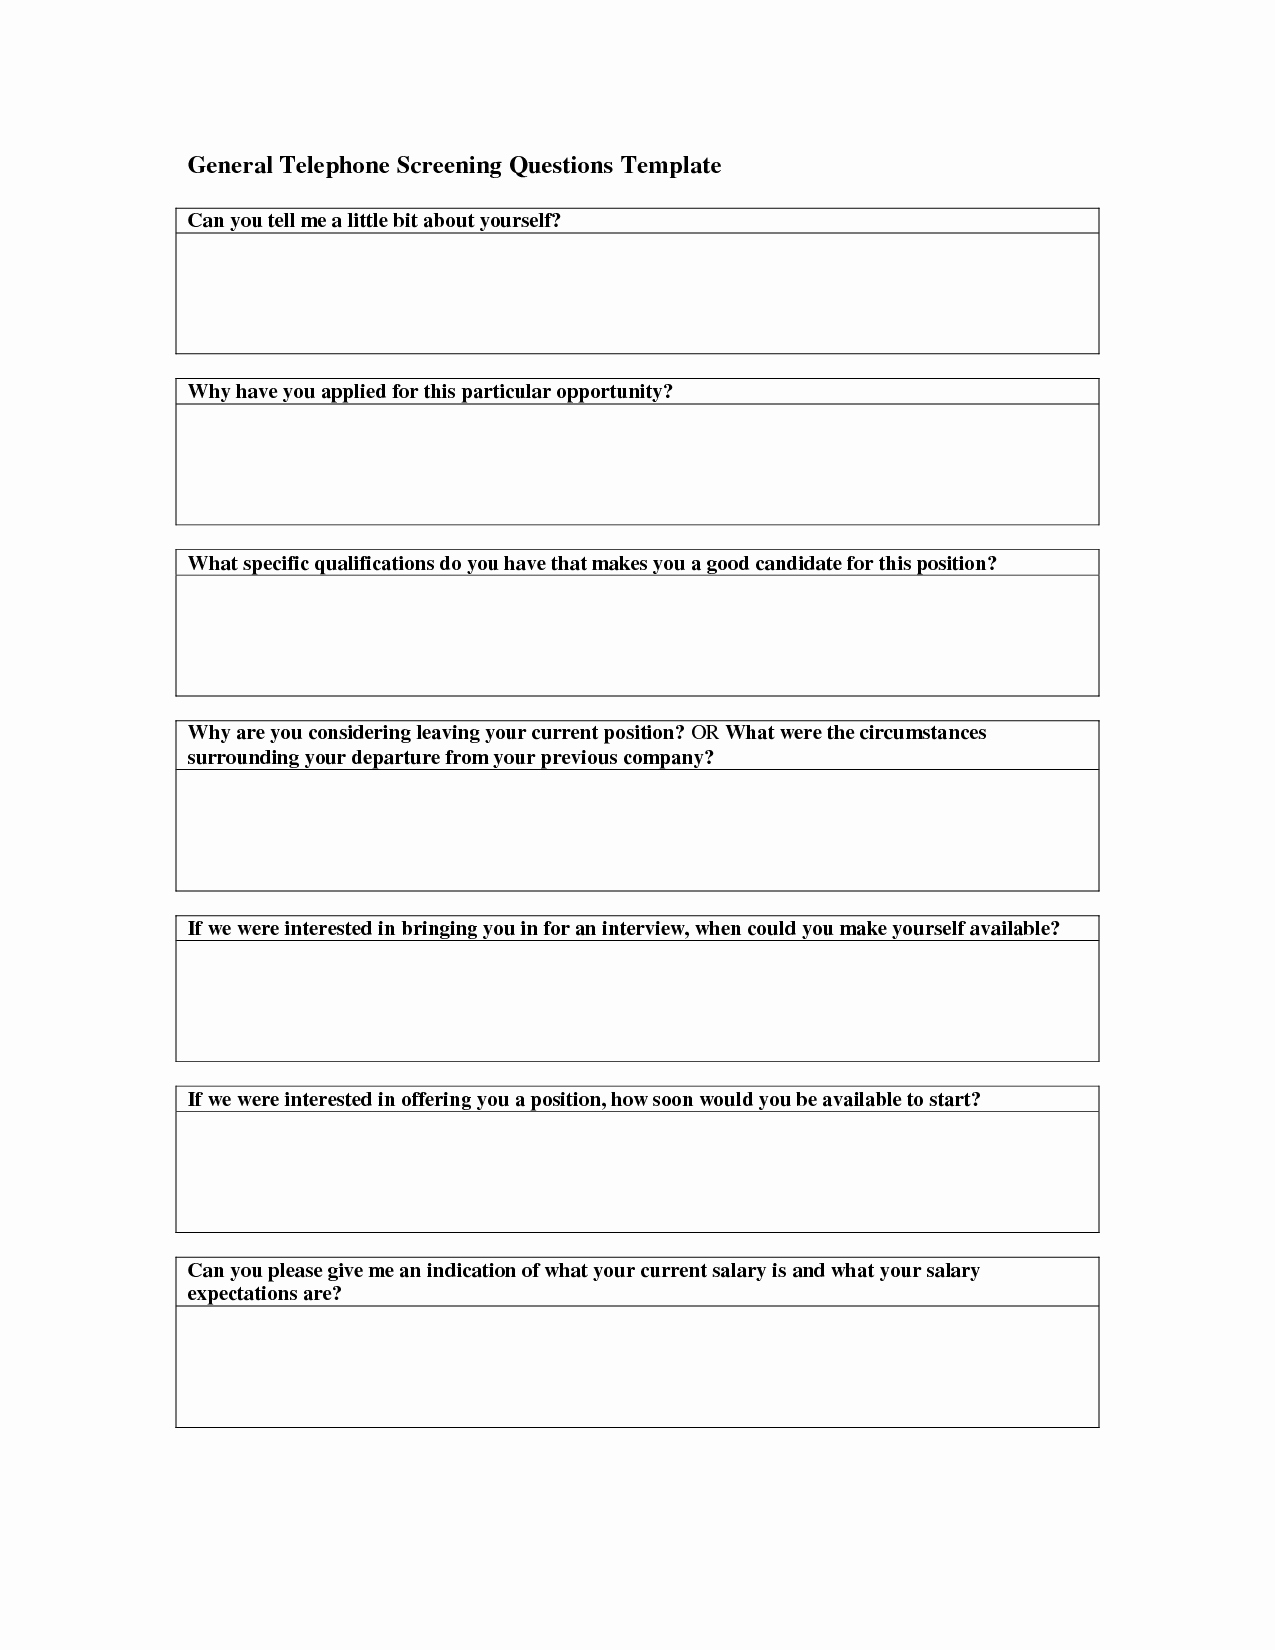 Questions and Answers Template New Best S Of Phone Interview Questions and Answers